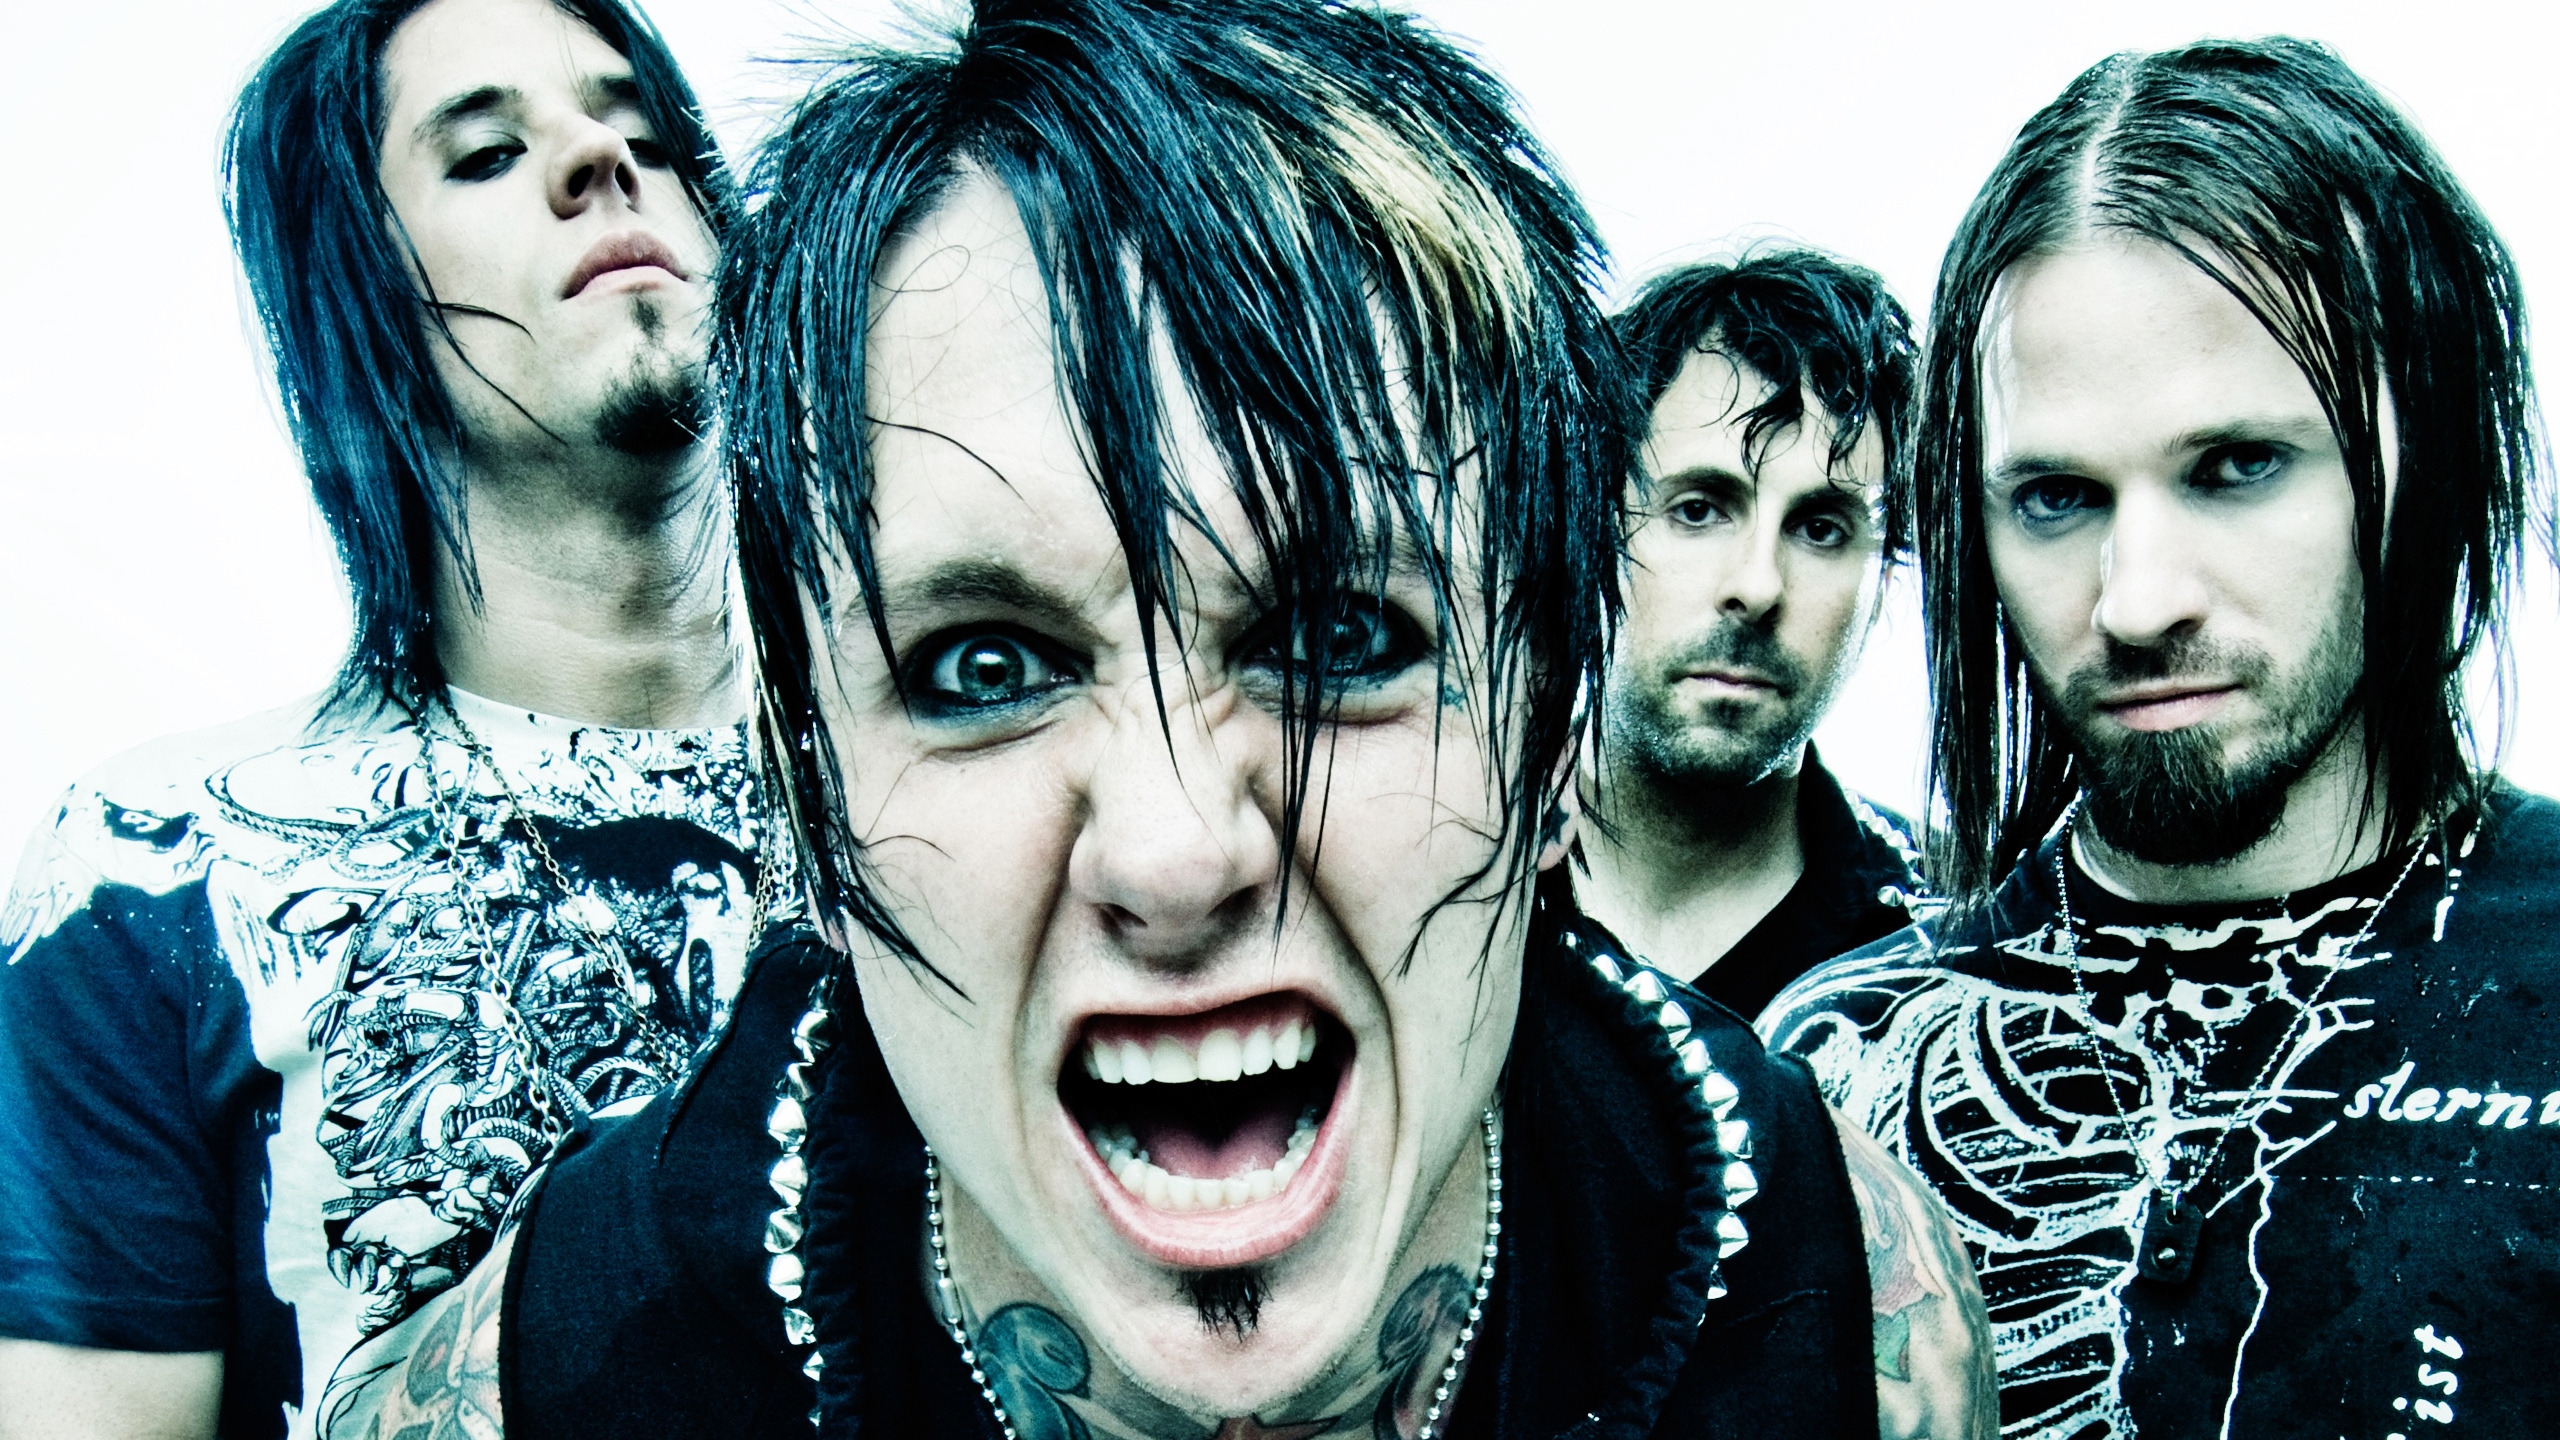 Papa Roach Poster for 2560x1440 HDTV resolution